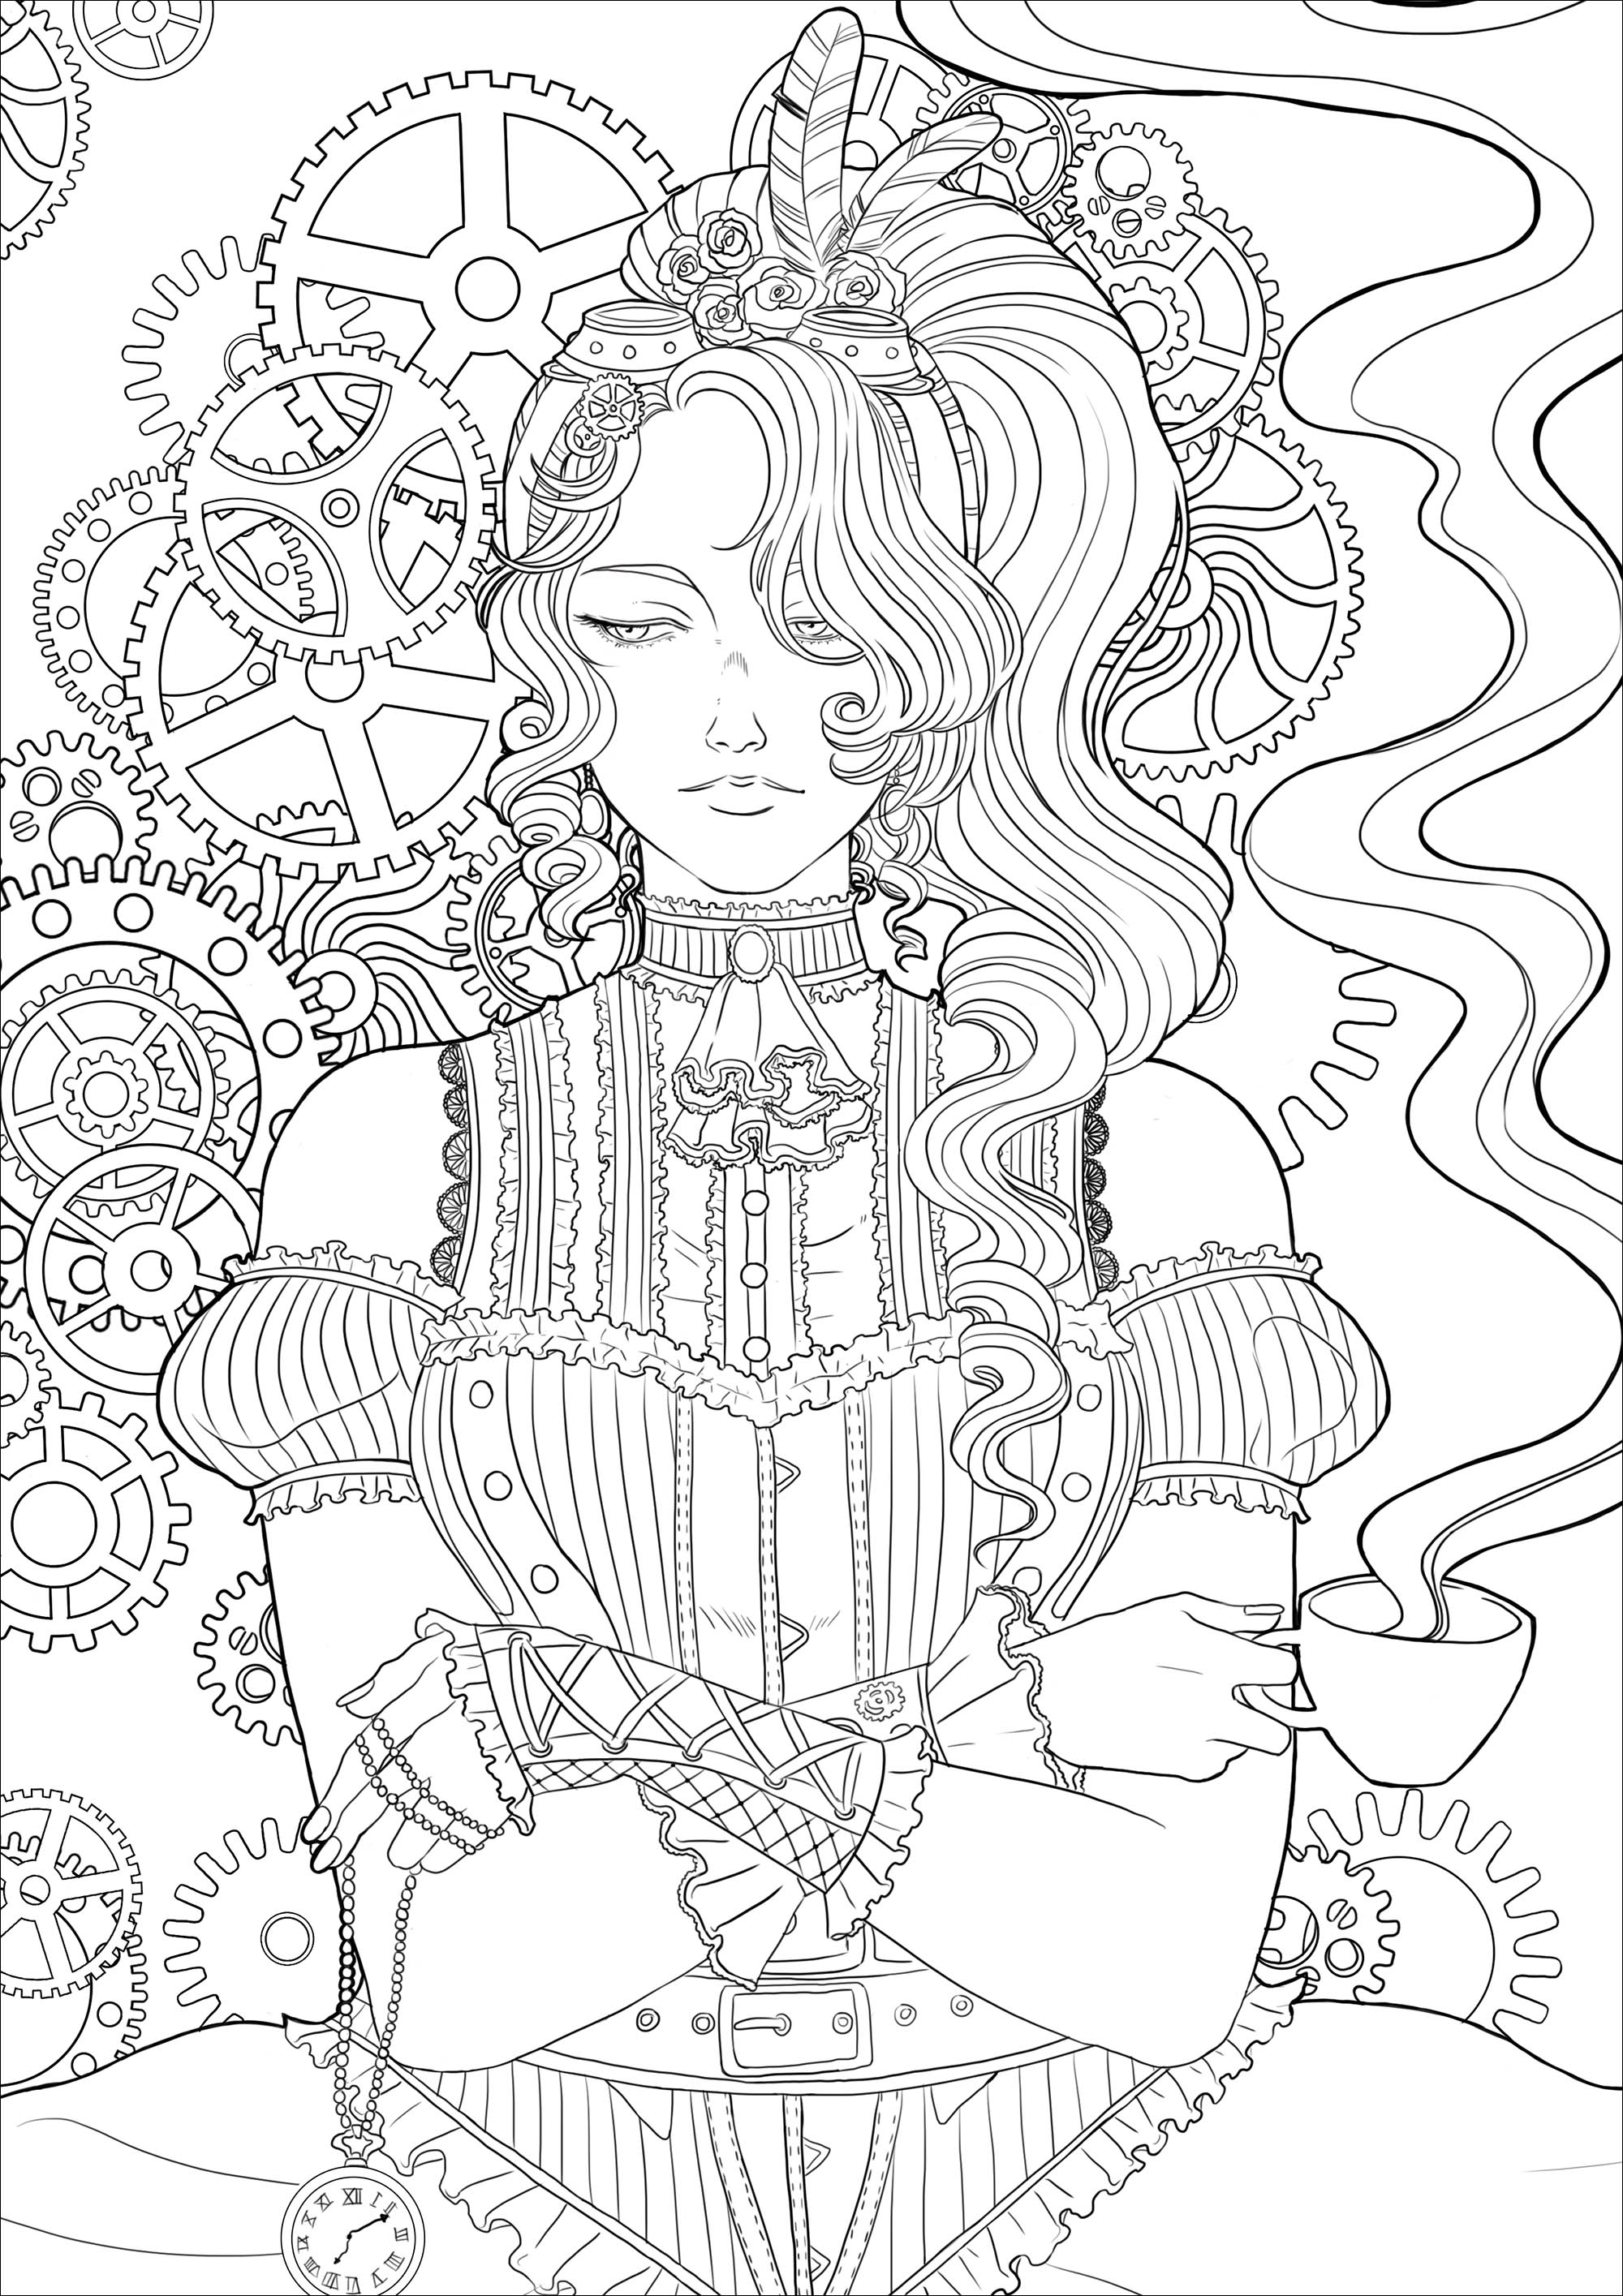 Coloring page of a melancholy young woman with a cup of tea, all in a Victorian environment and mechanisms. Version 2, Artist : Lestat Hallward Holmes